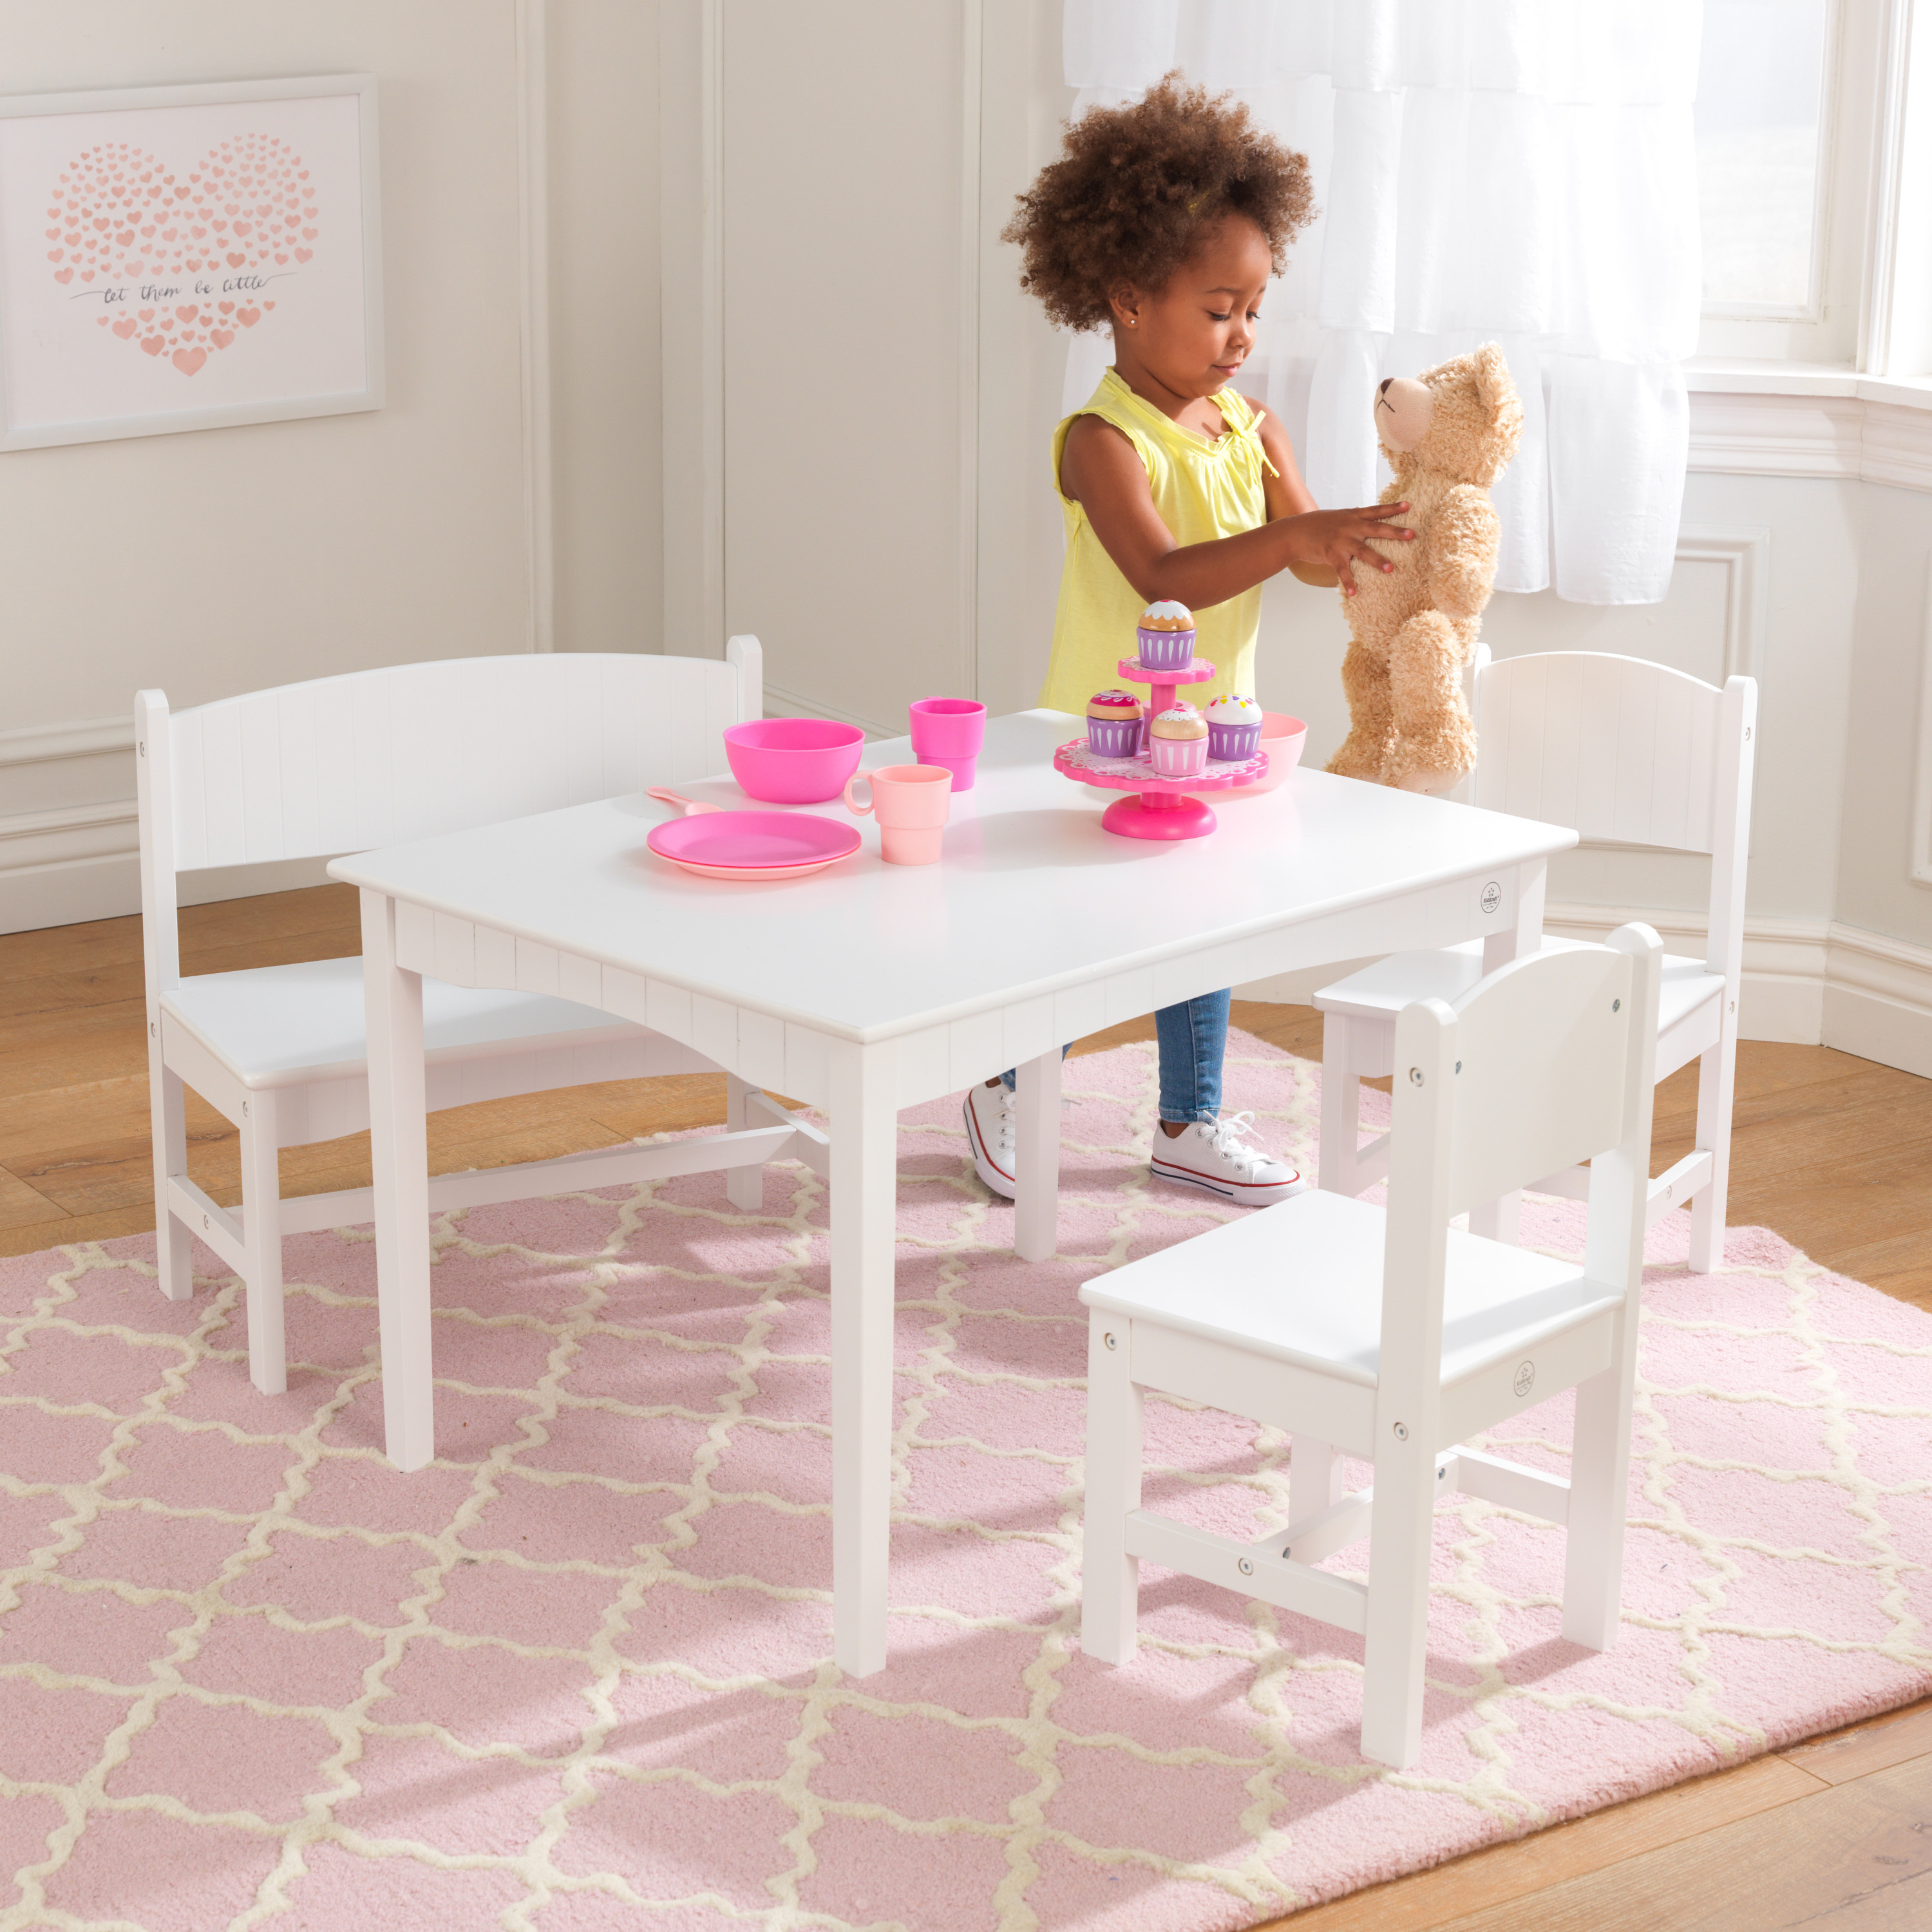 KidKraft Nantucket Wooden Table with Bench and 2 Chairs, Children's Furniture - White - image 2 of 8